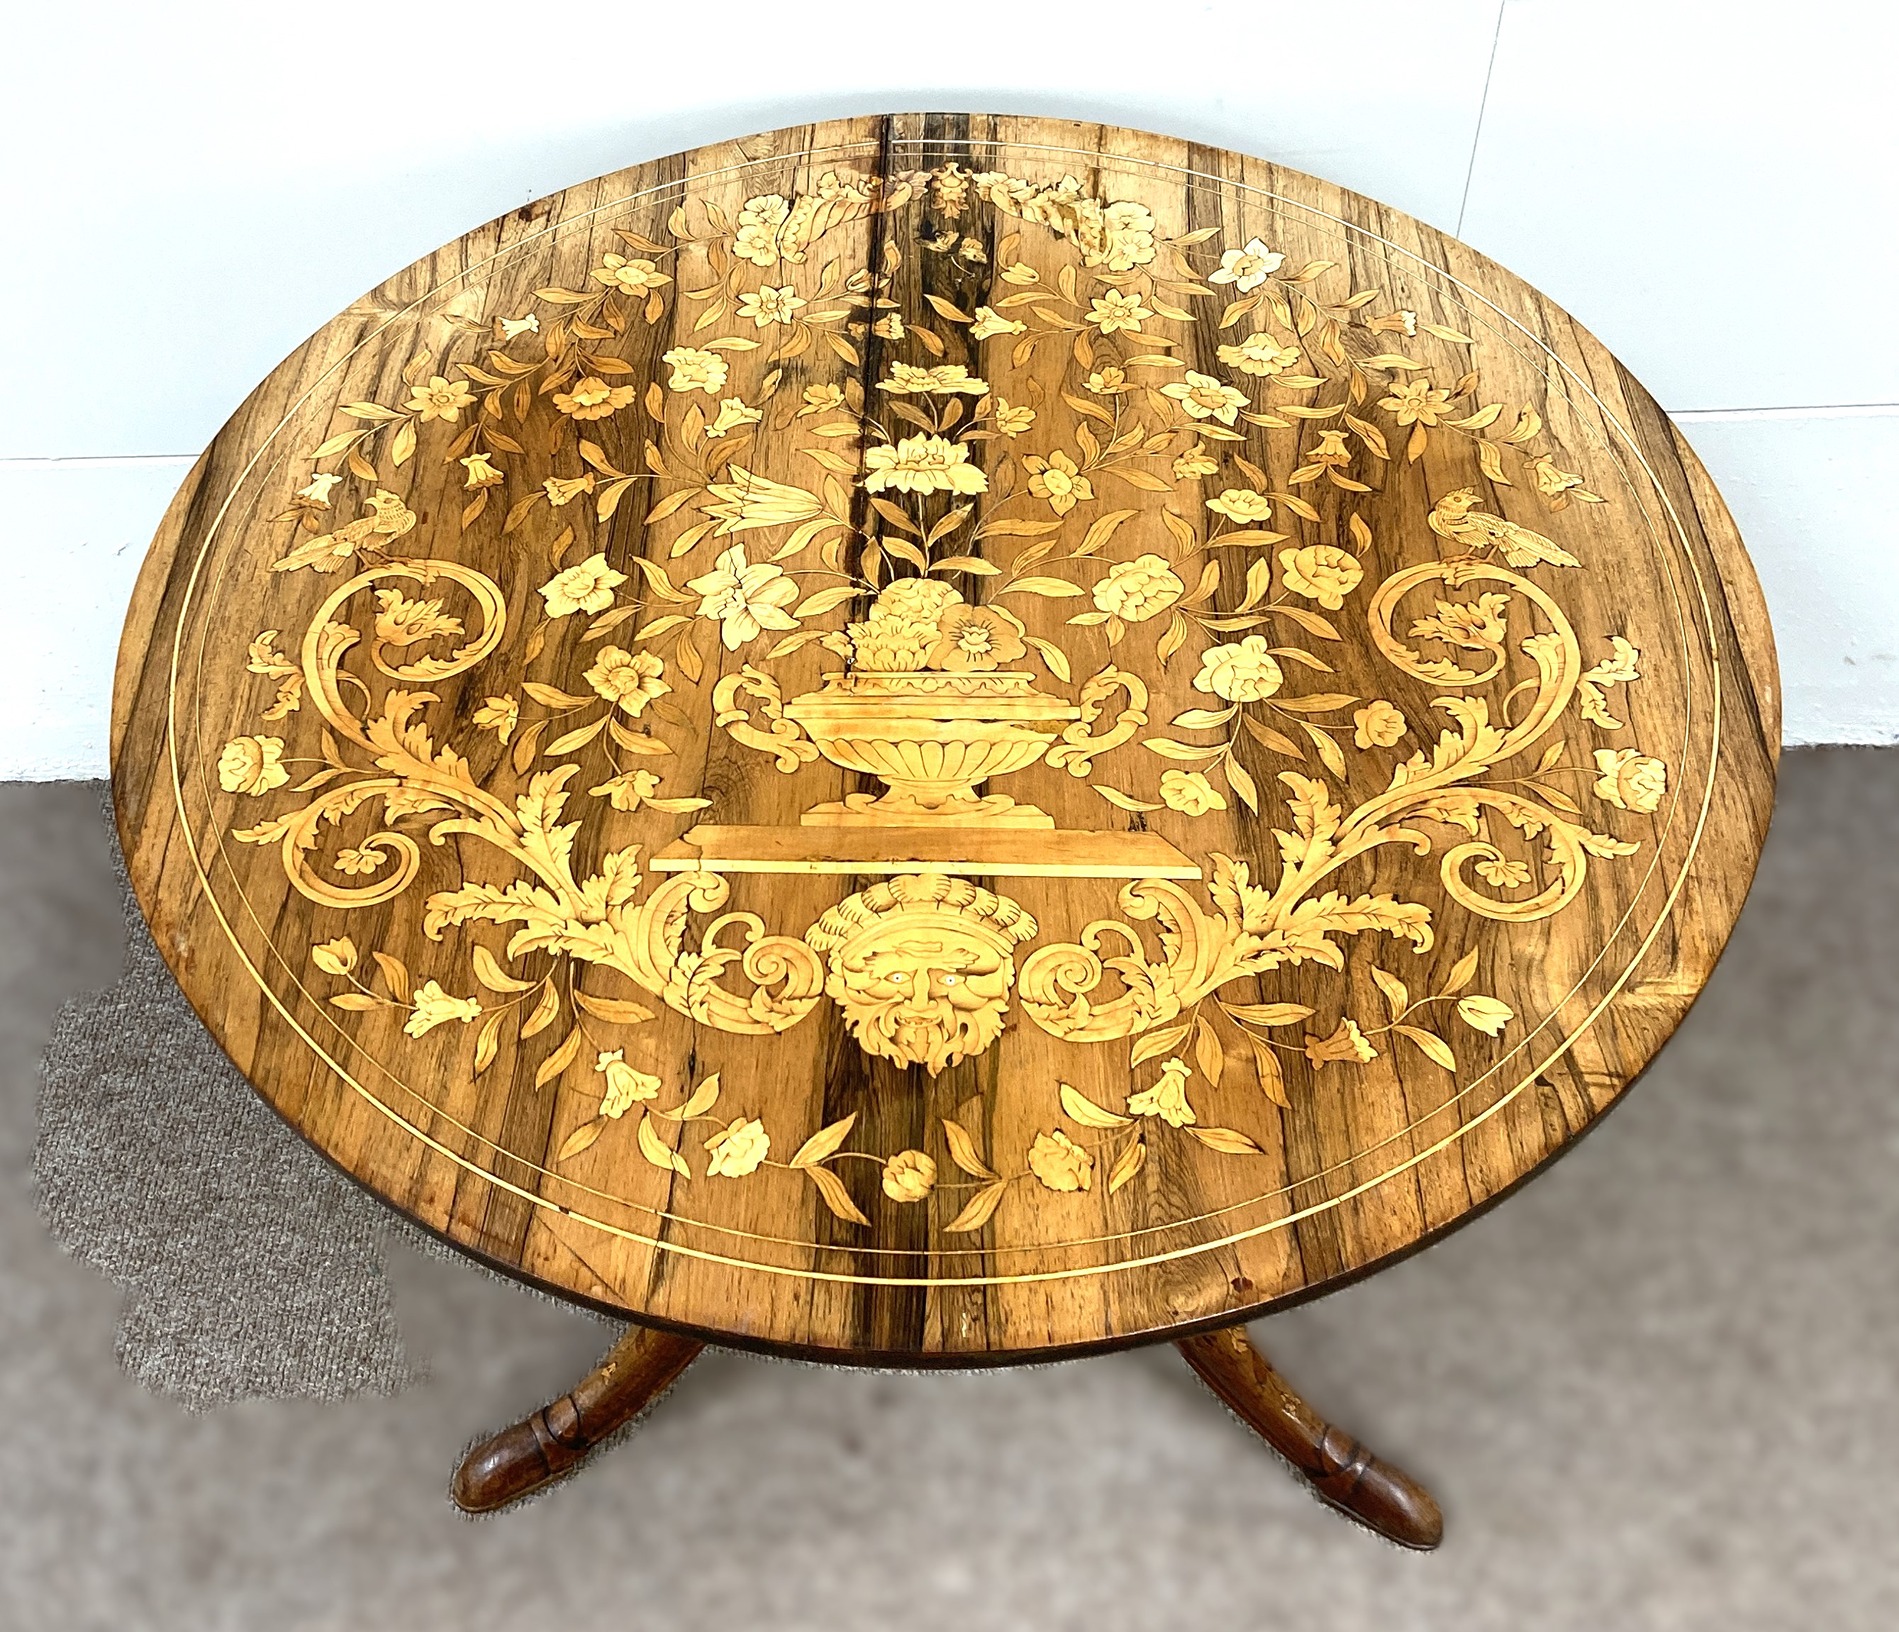 An Anglo-Dutch inlaid circular wine table, late 18th century and later, with a tilting coromandel - Image 4 of 6